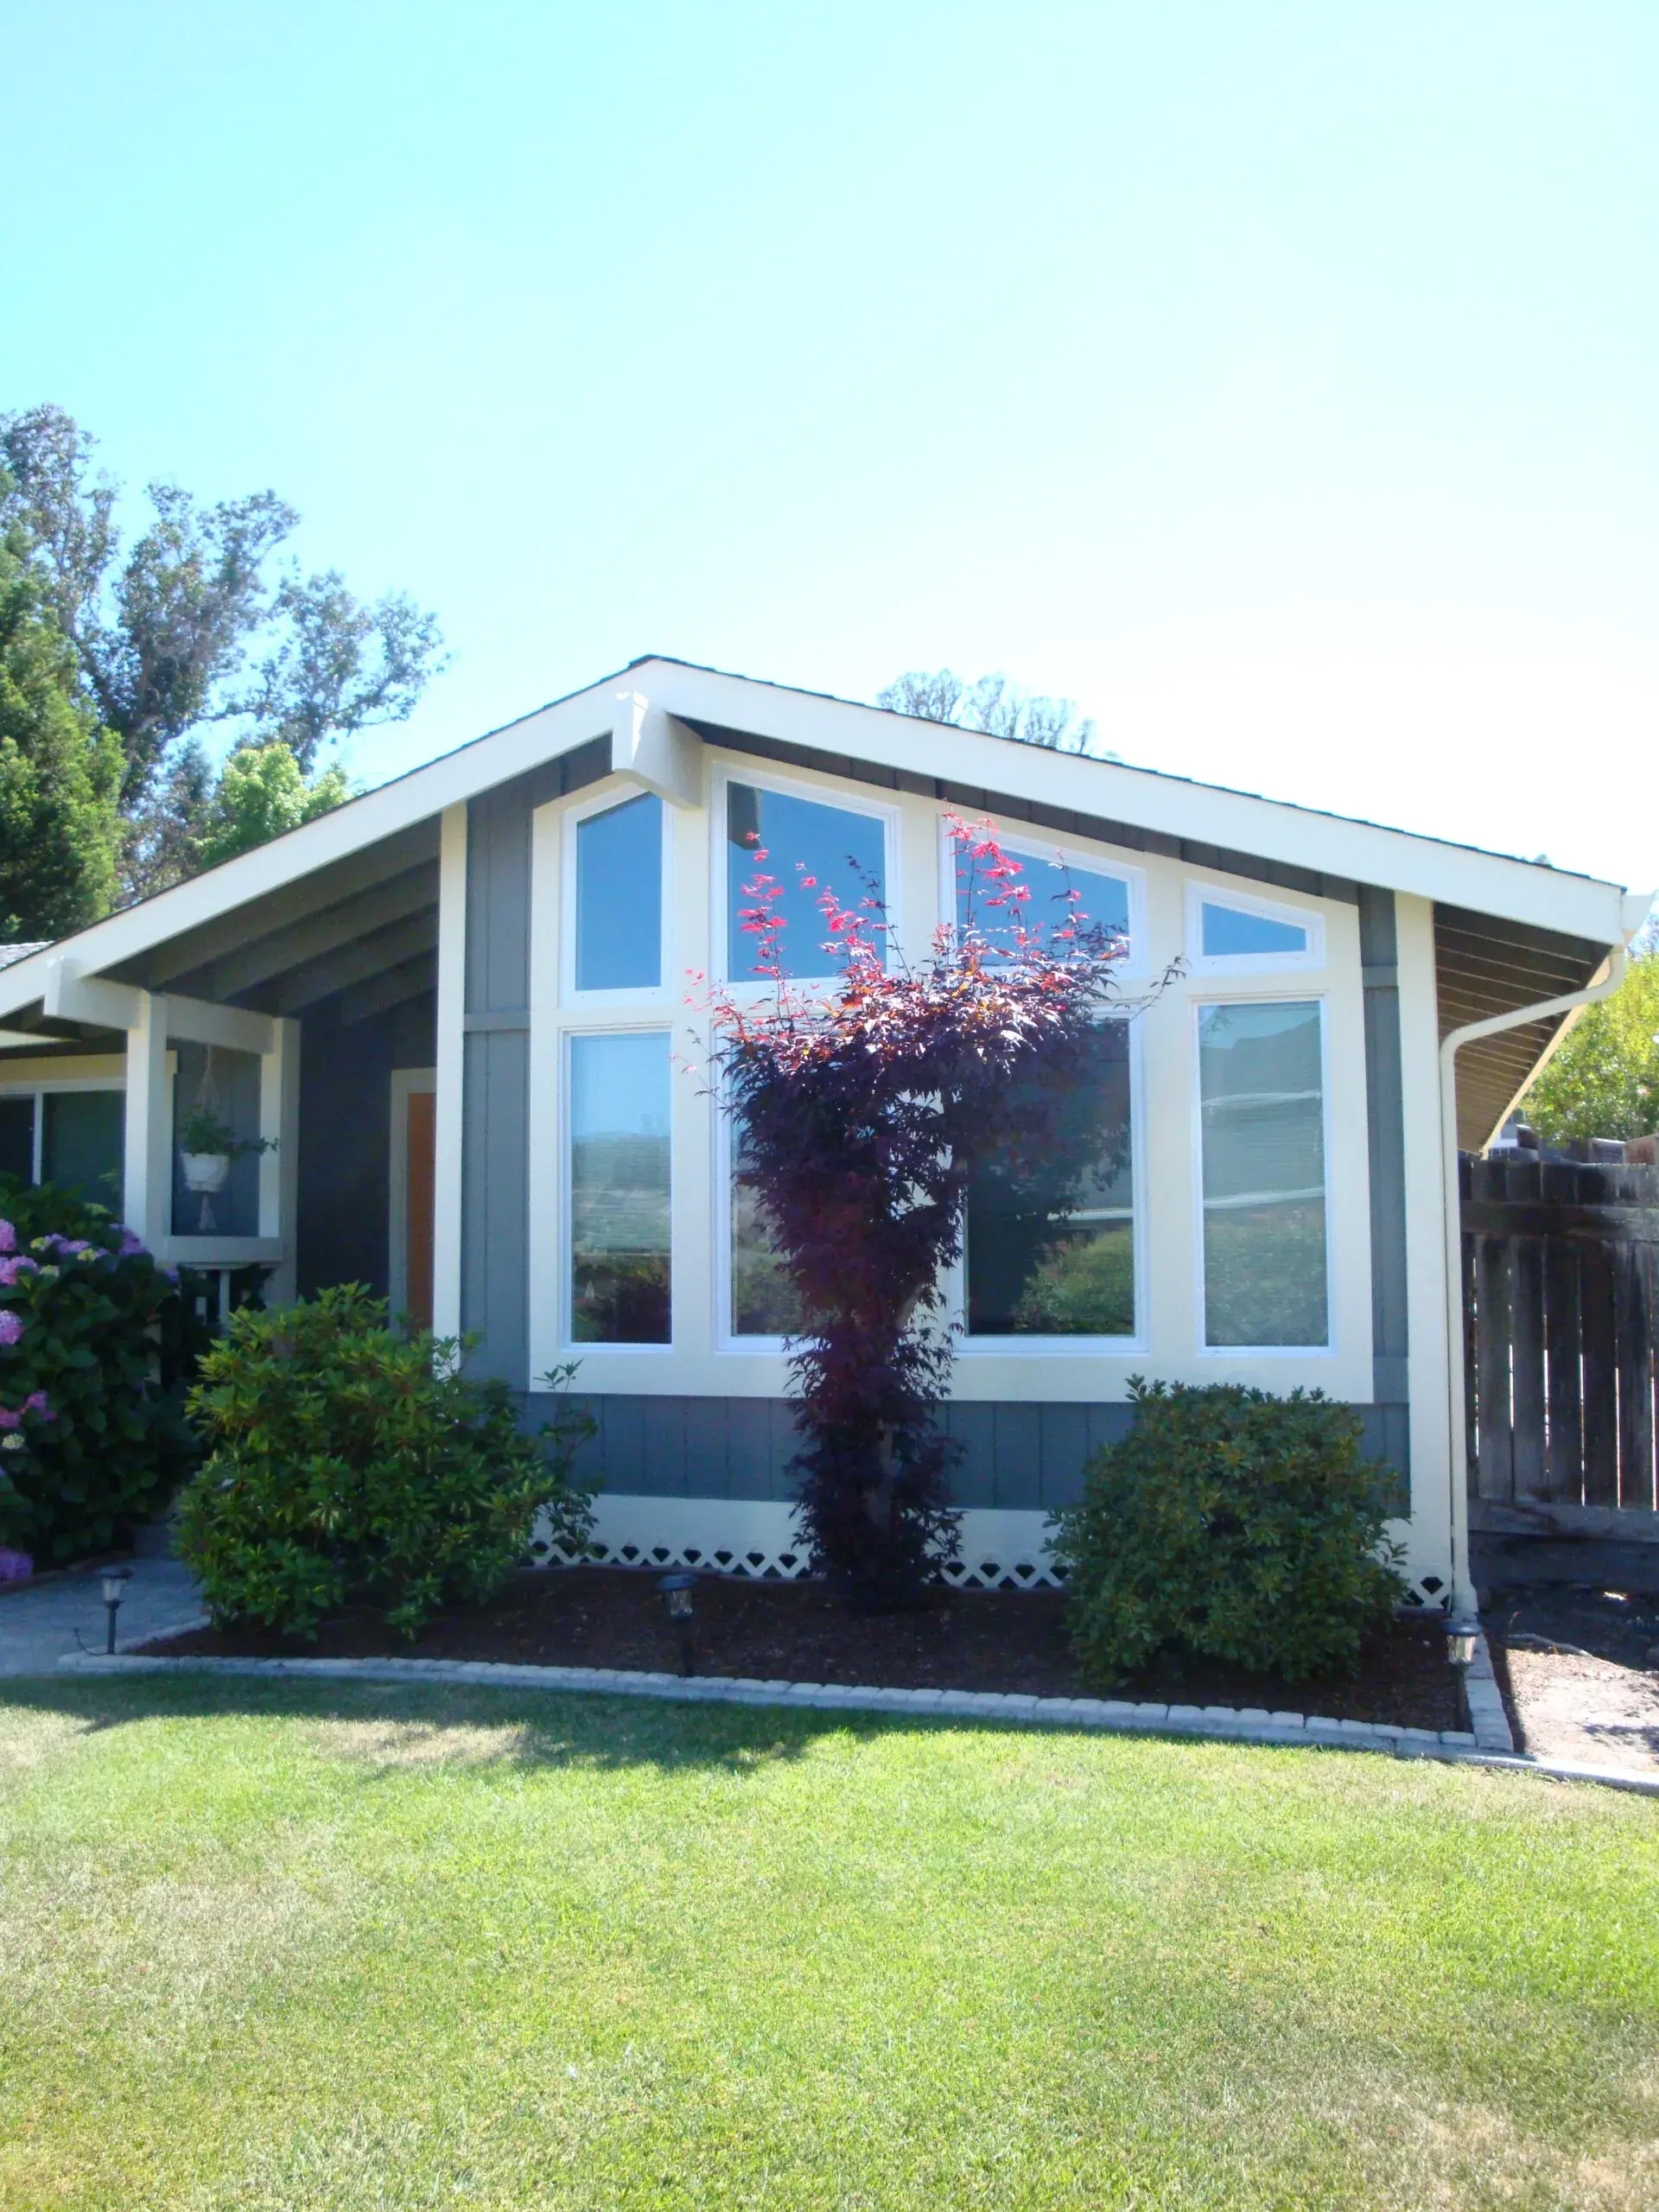 Picture of Save Energy Company installed retrofit vinyl windows to enhance the curb appeal of this Rohnert Park home. - Save Energy Company